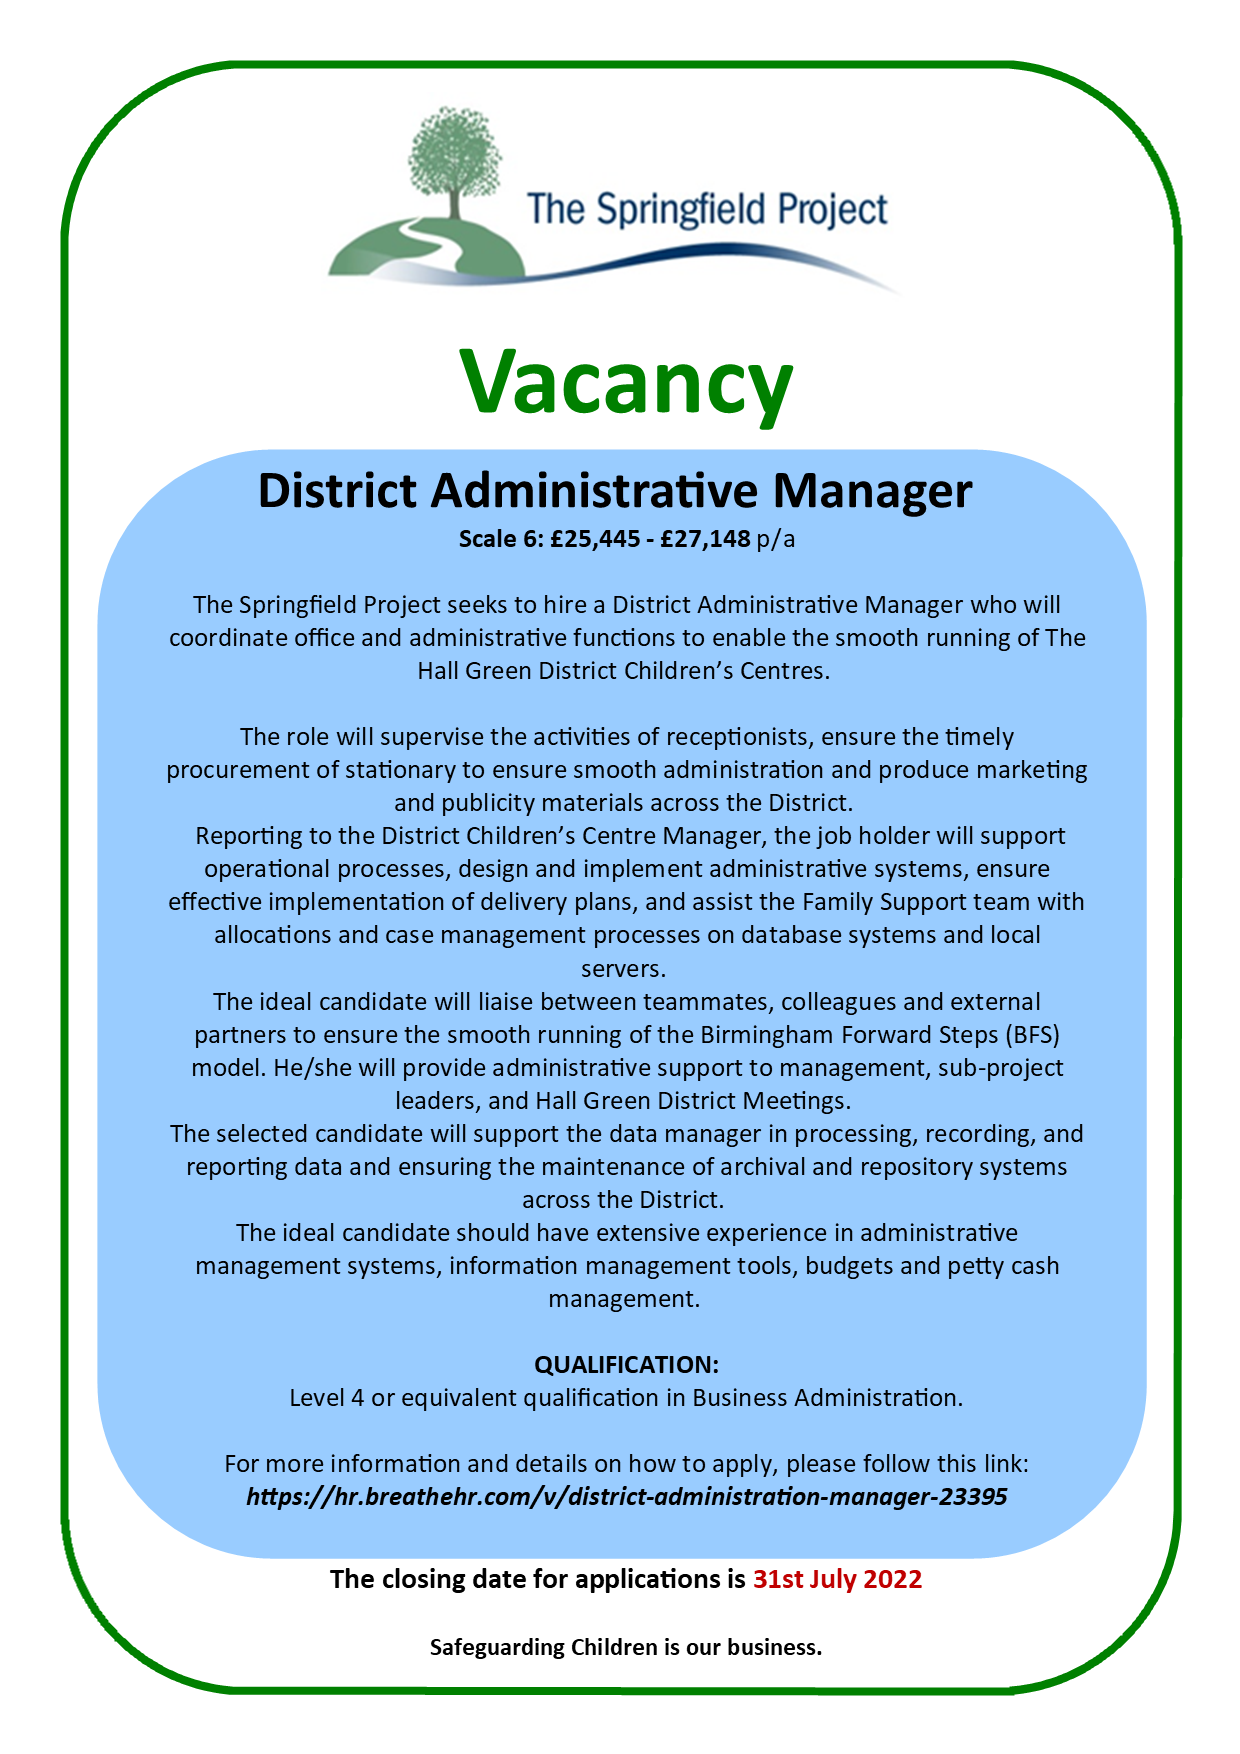 District Administrative Manager The Springfield Project